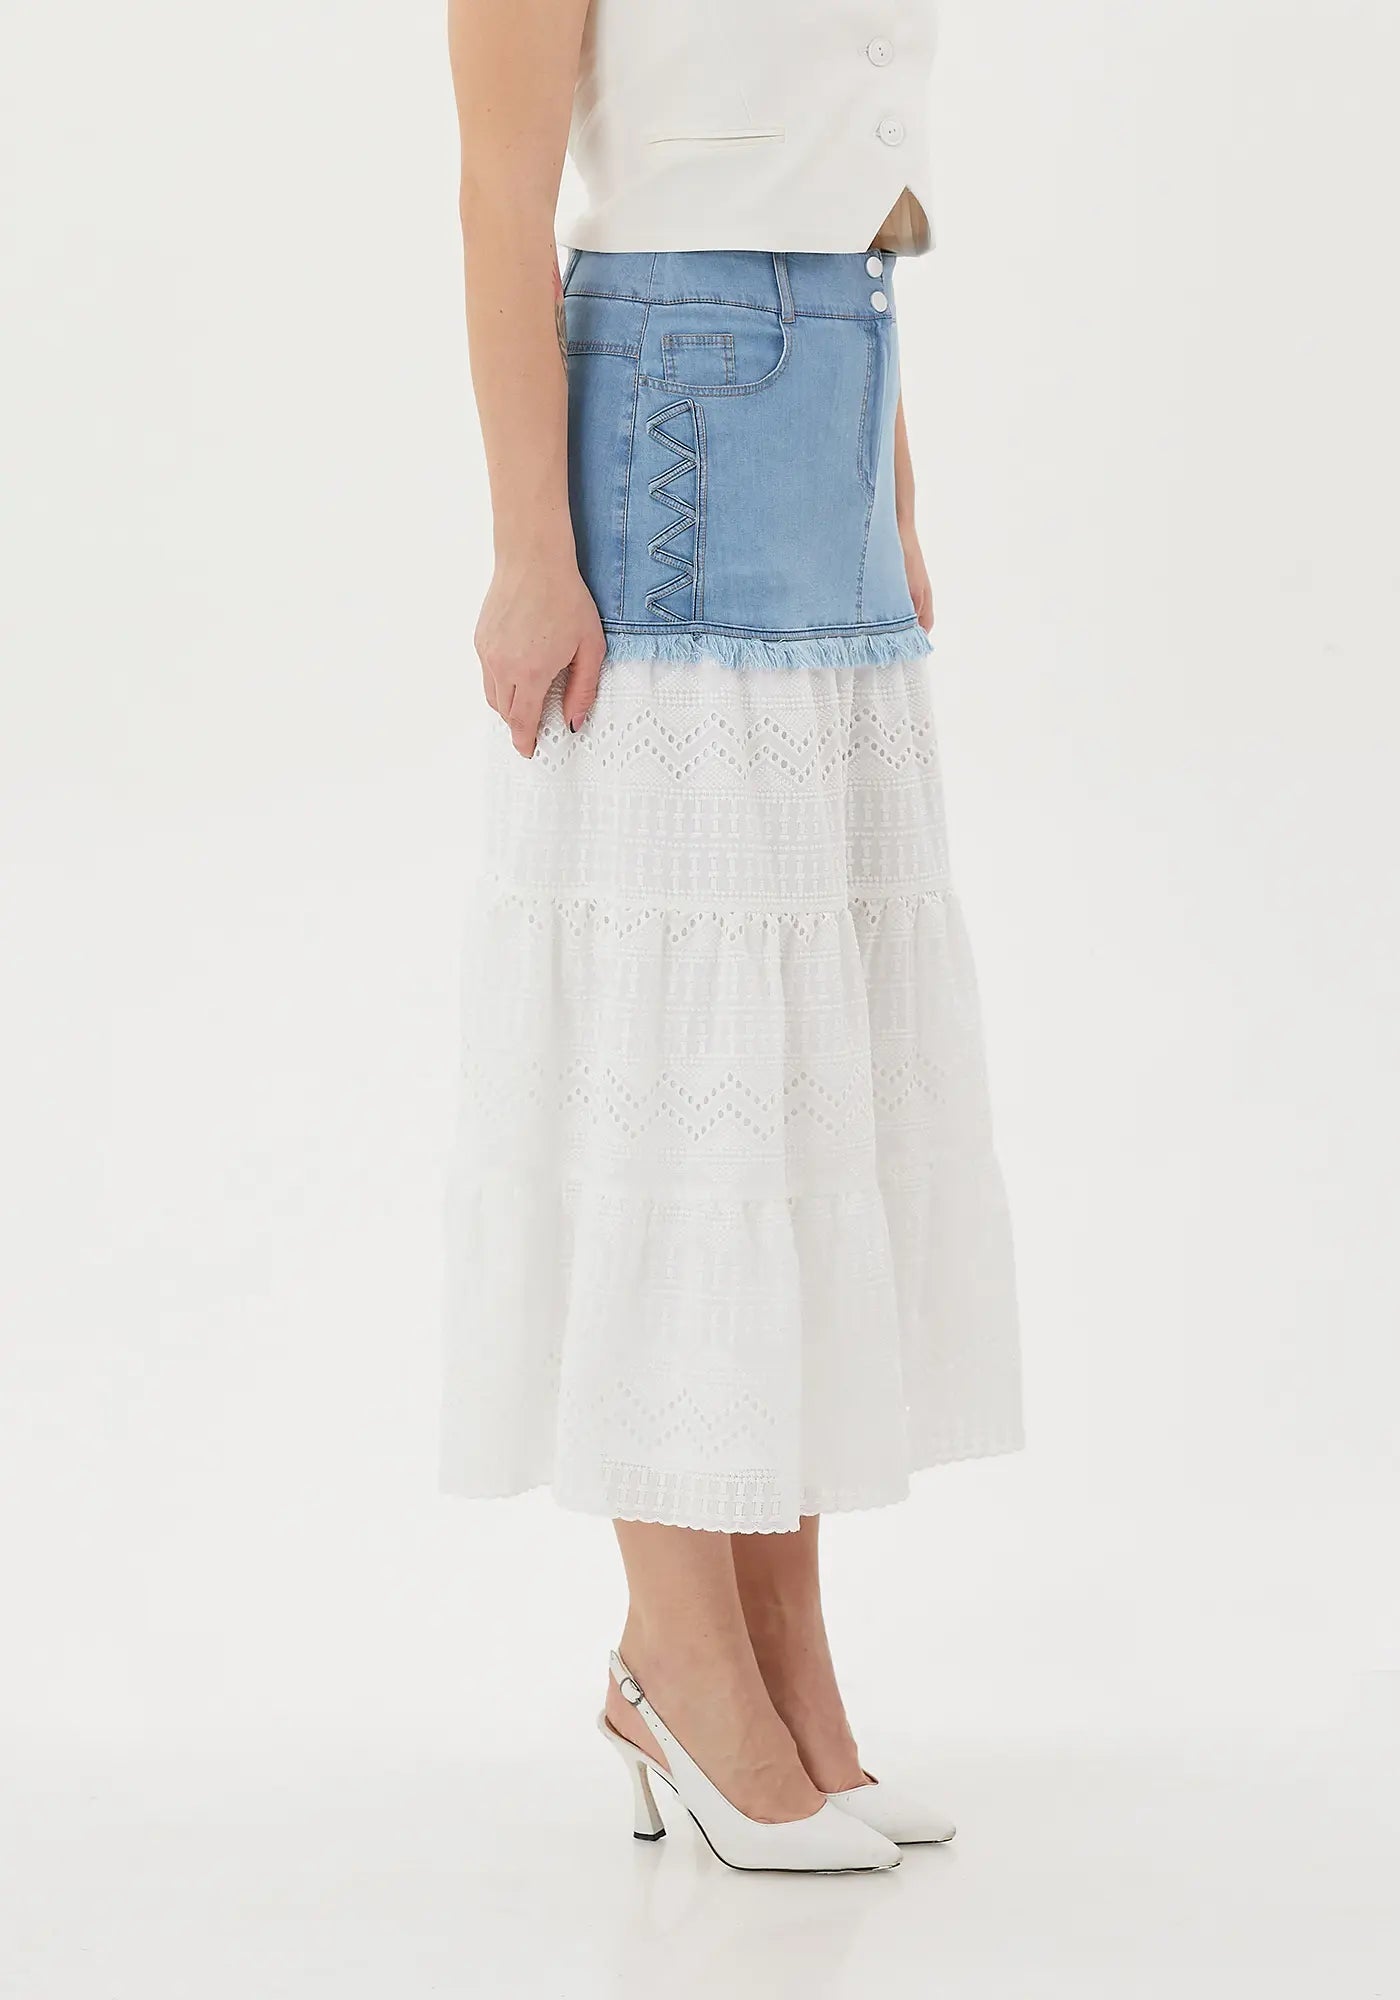 Ruffled Below the Knee Skirt with Denim Details: Lined and Stylish - G - Line